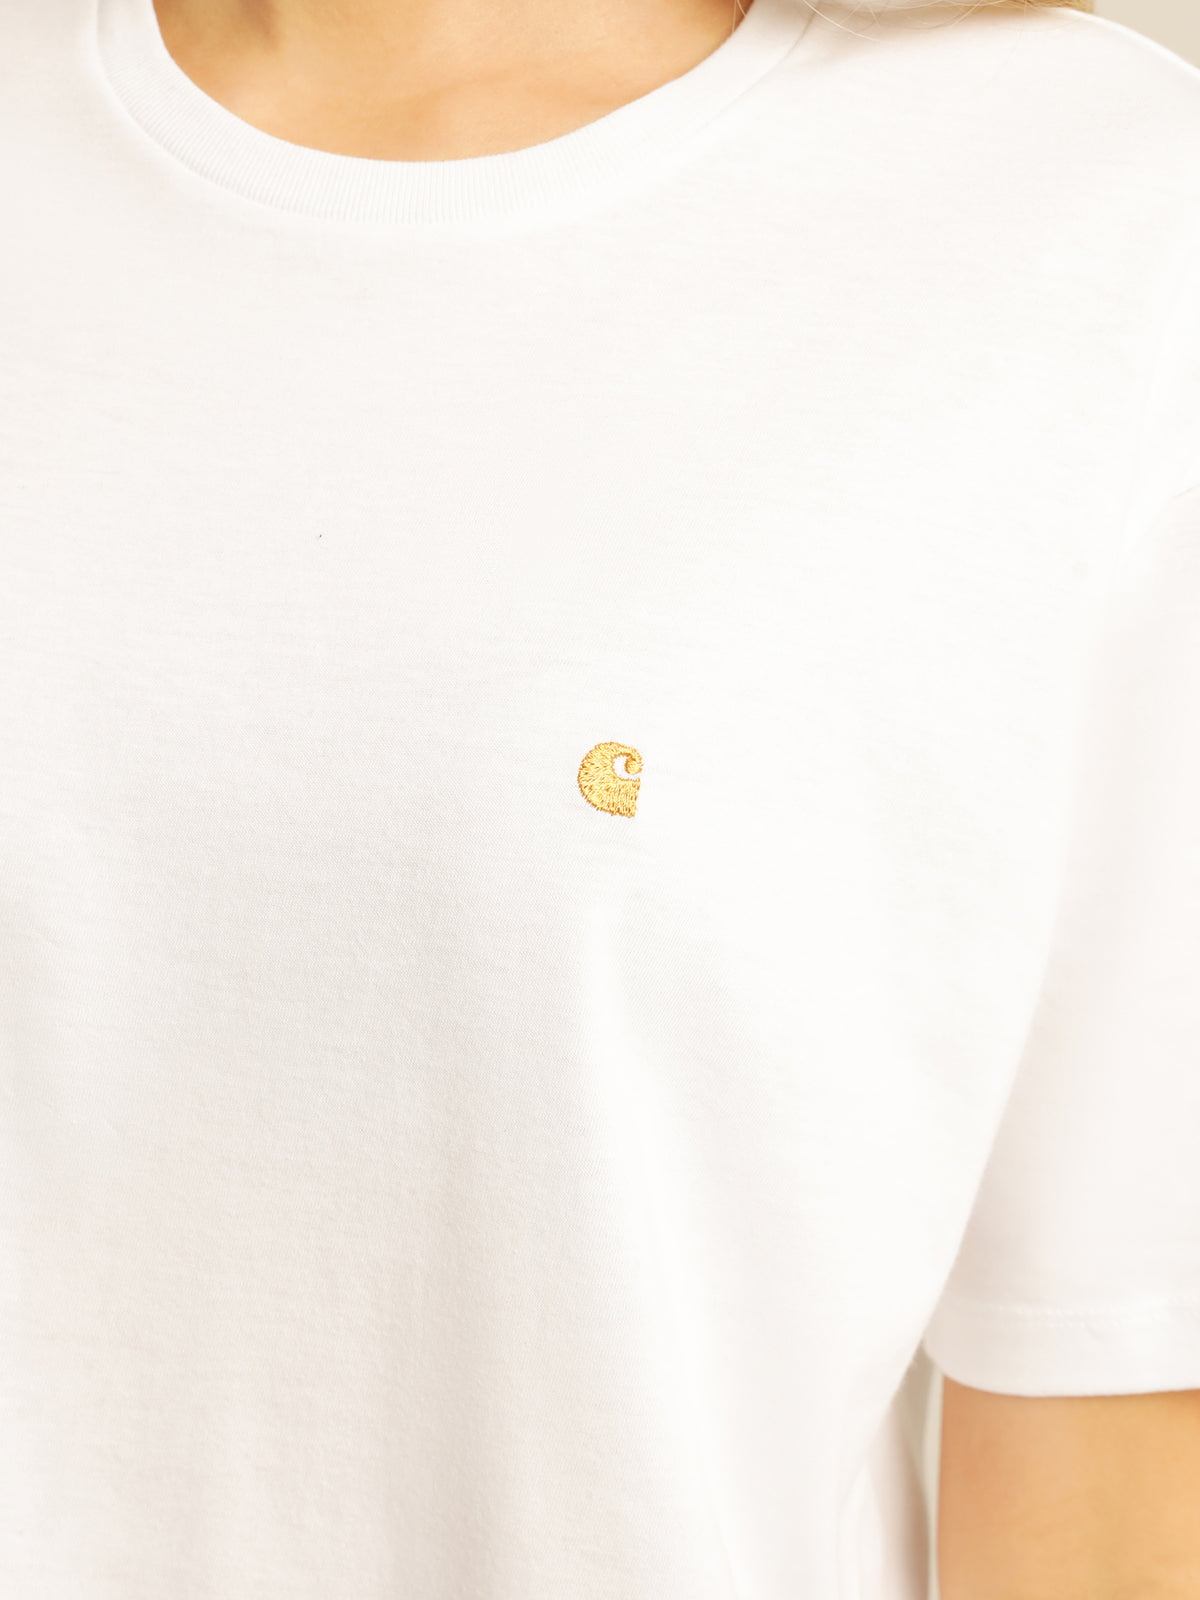 Short Sleeve Chase T-Shirt in White and Gold